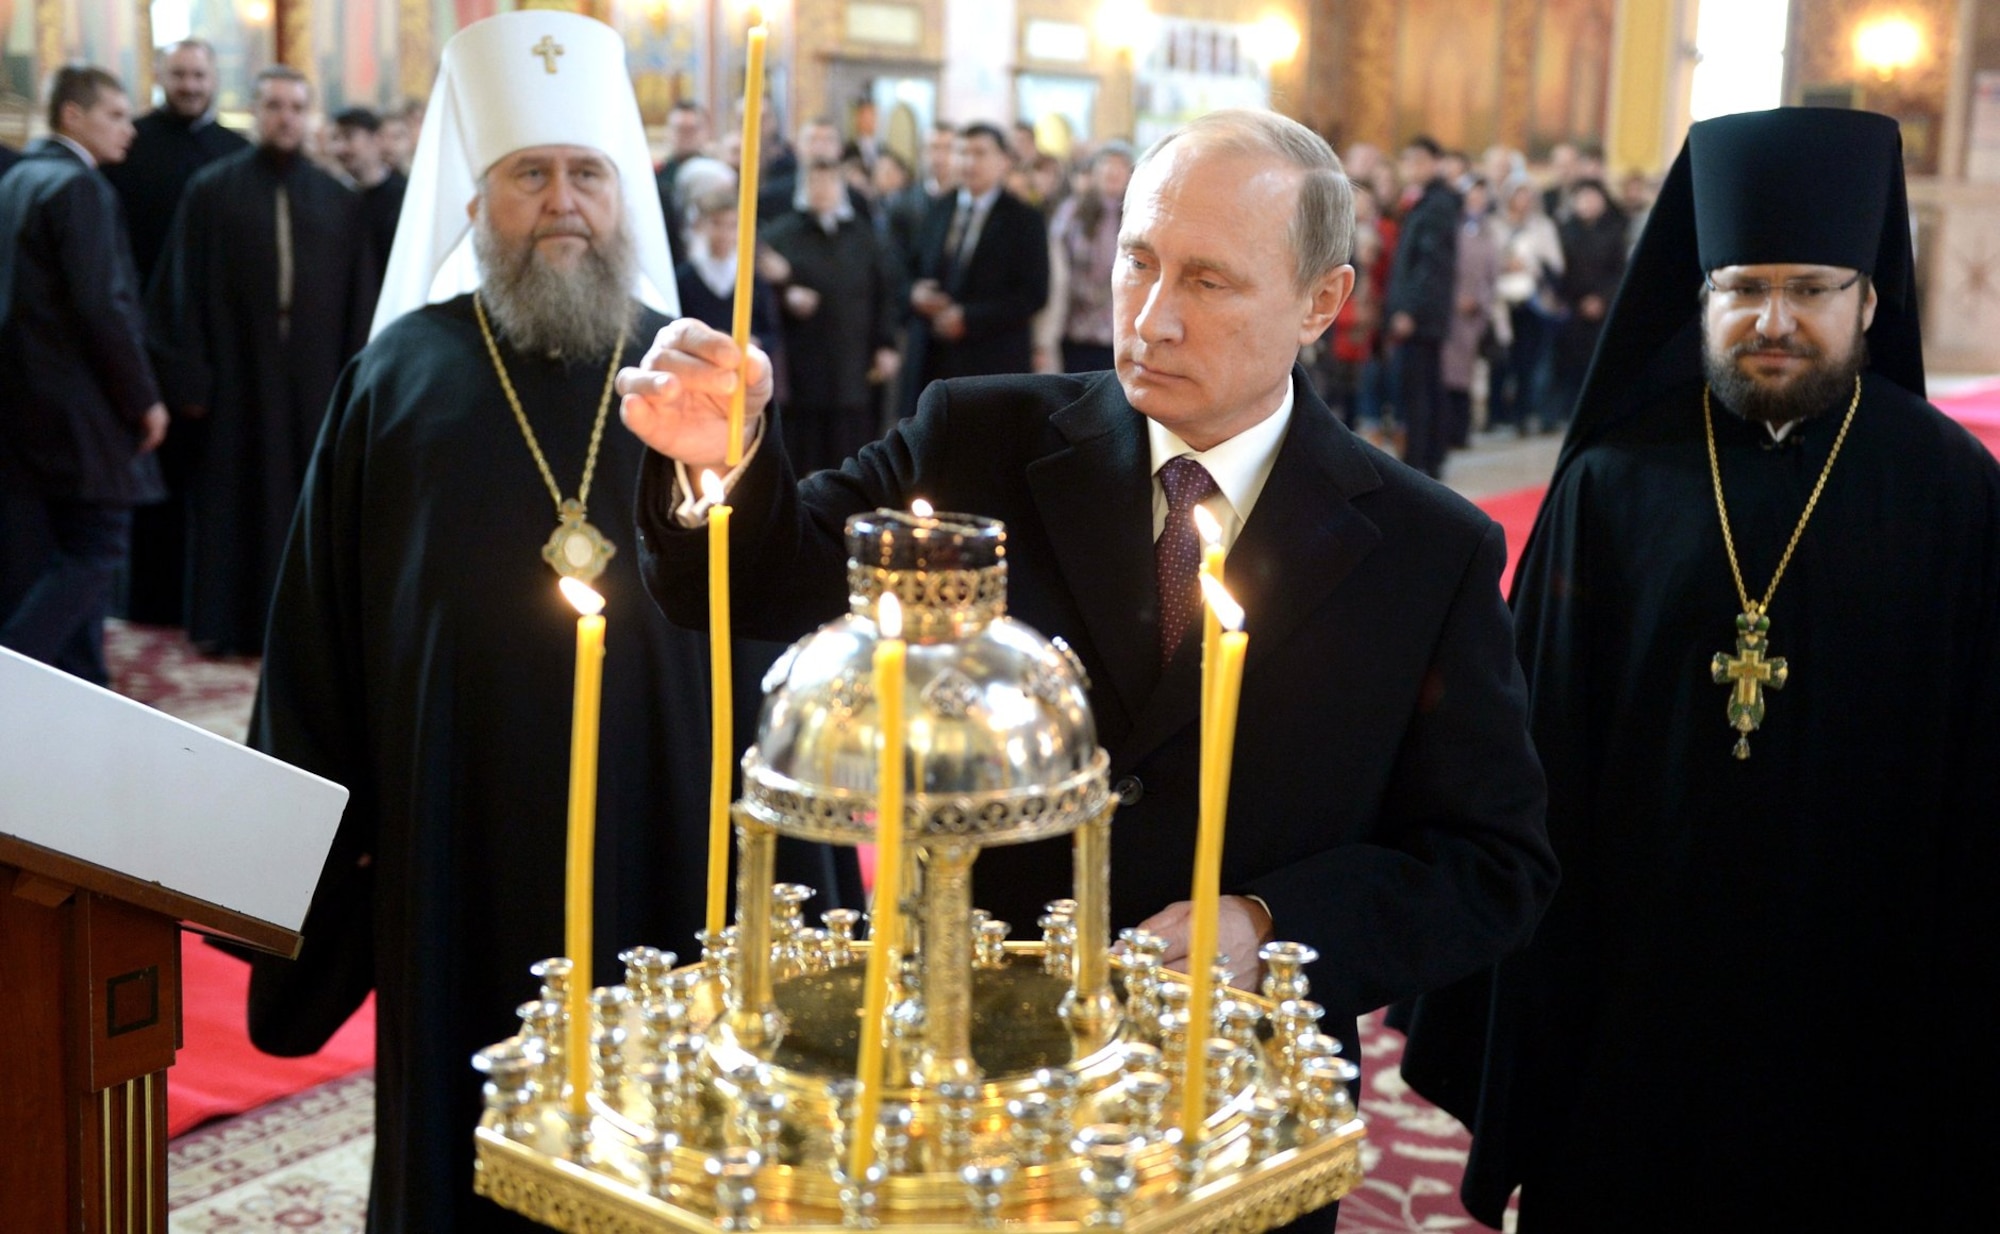 The Unexpected Theologian: The Rise of Religious Messaging in Putin’s ...